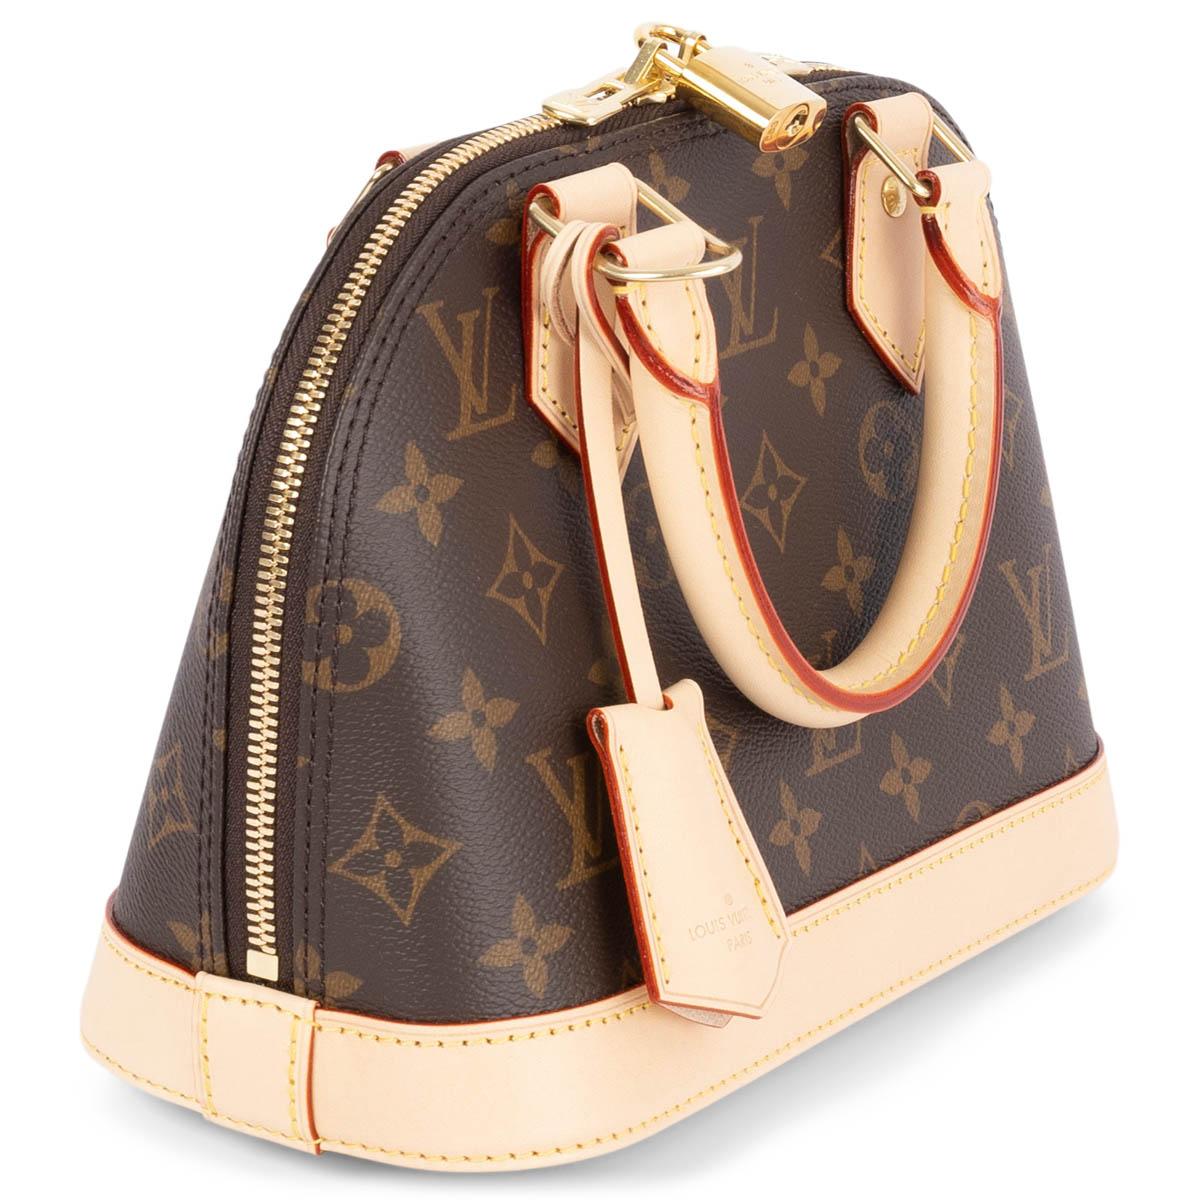 100% authentic Louis Vuitton Alma BB Monogram Bag in brown coated canvas featuring smooth cowhide-leather trim and gold-tone hardware. Lined in brown canvas with one flat pocket against the back. Opens with a double zip closure and comes with